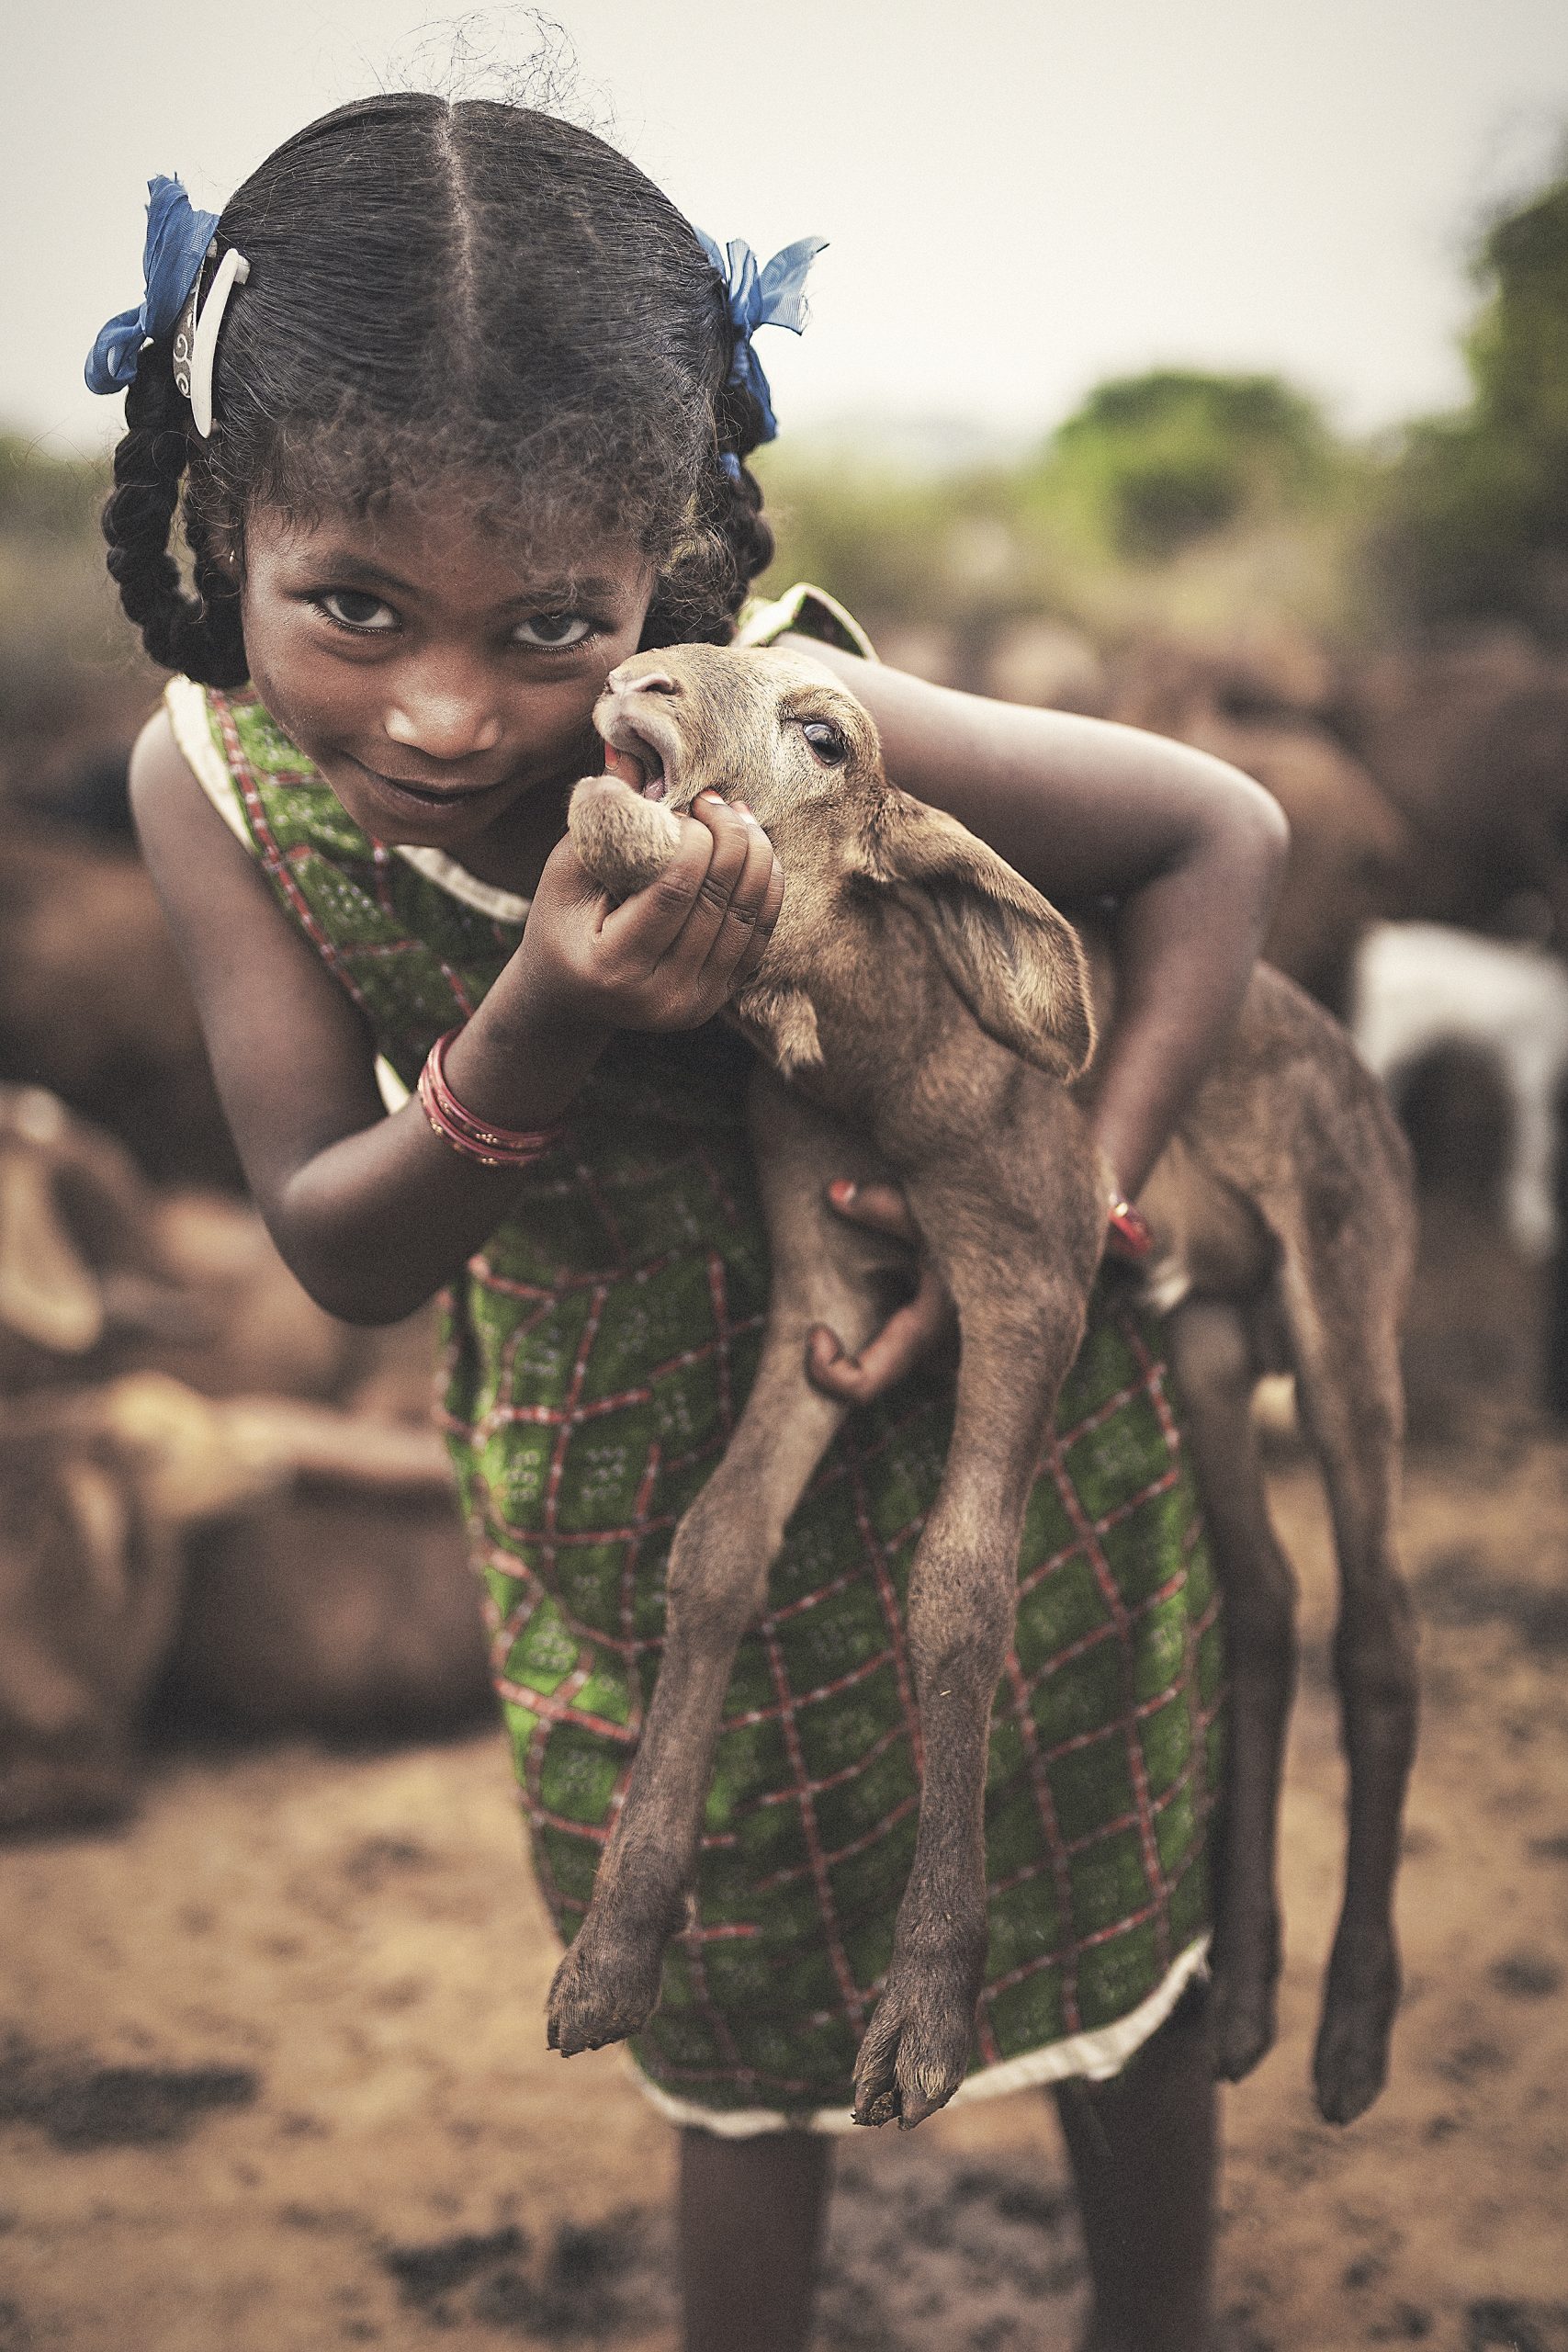 Girl with baby goat